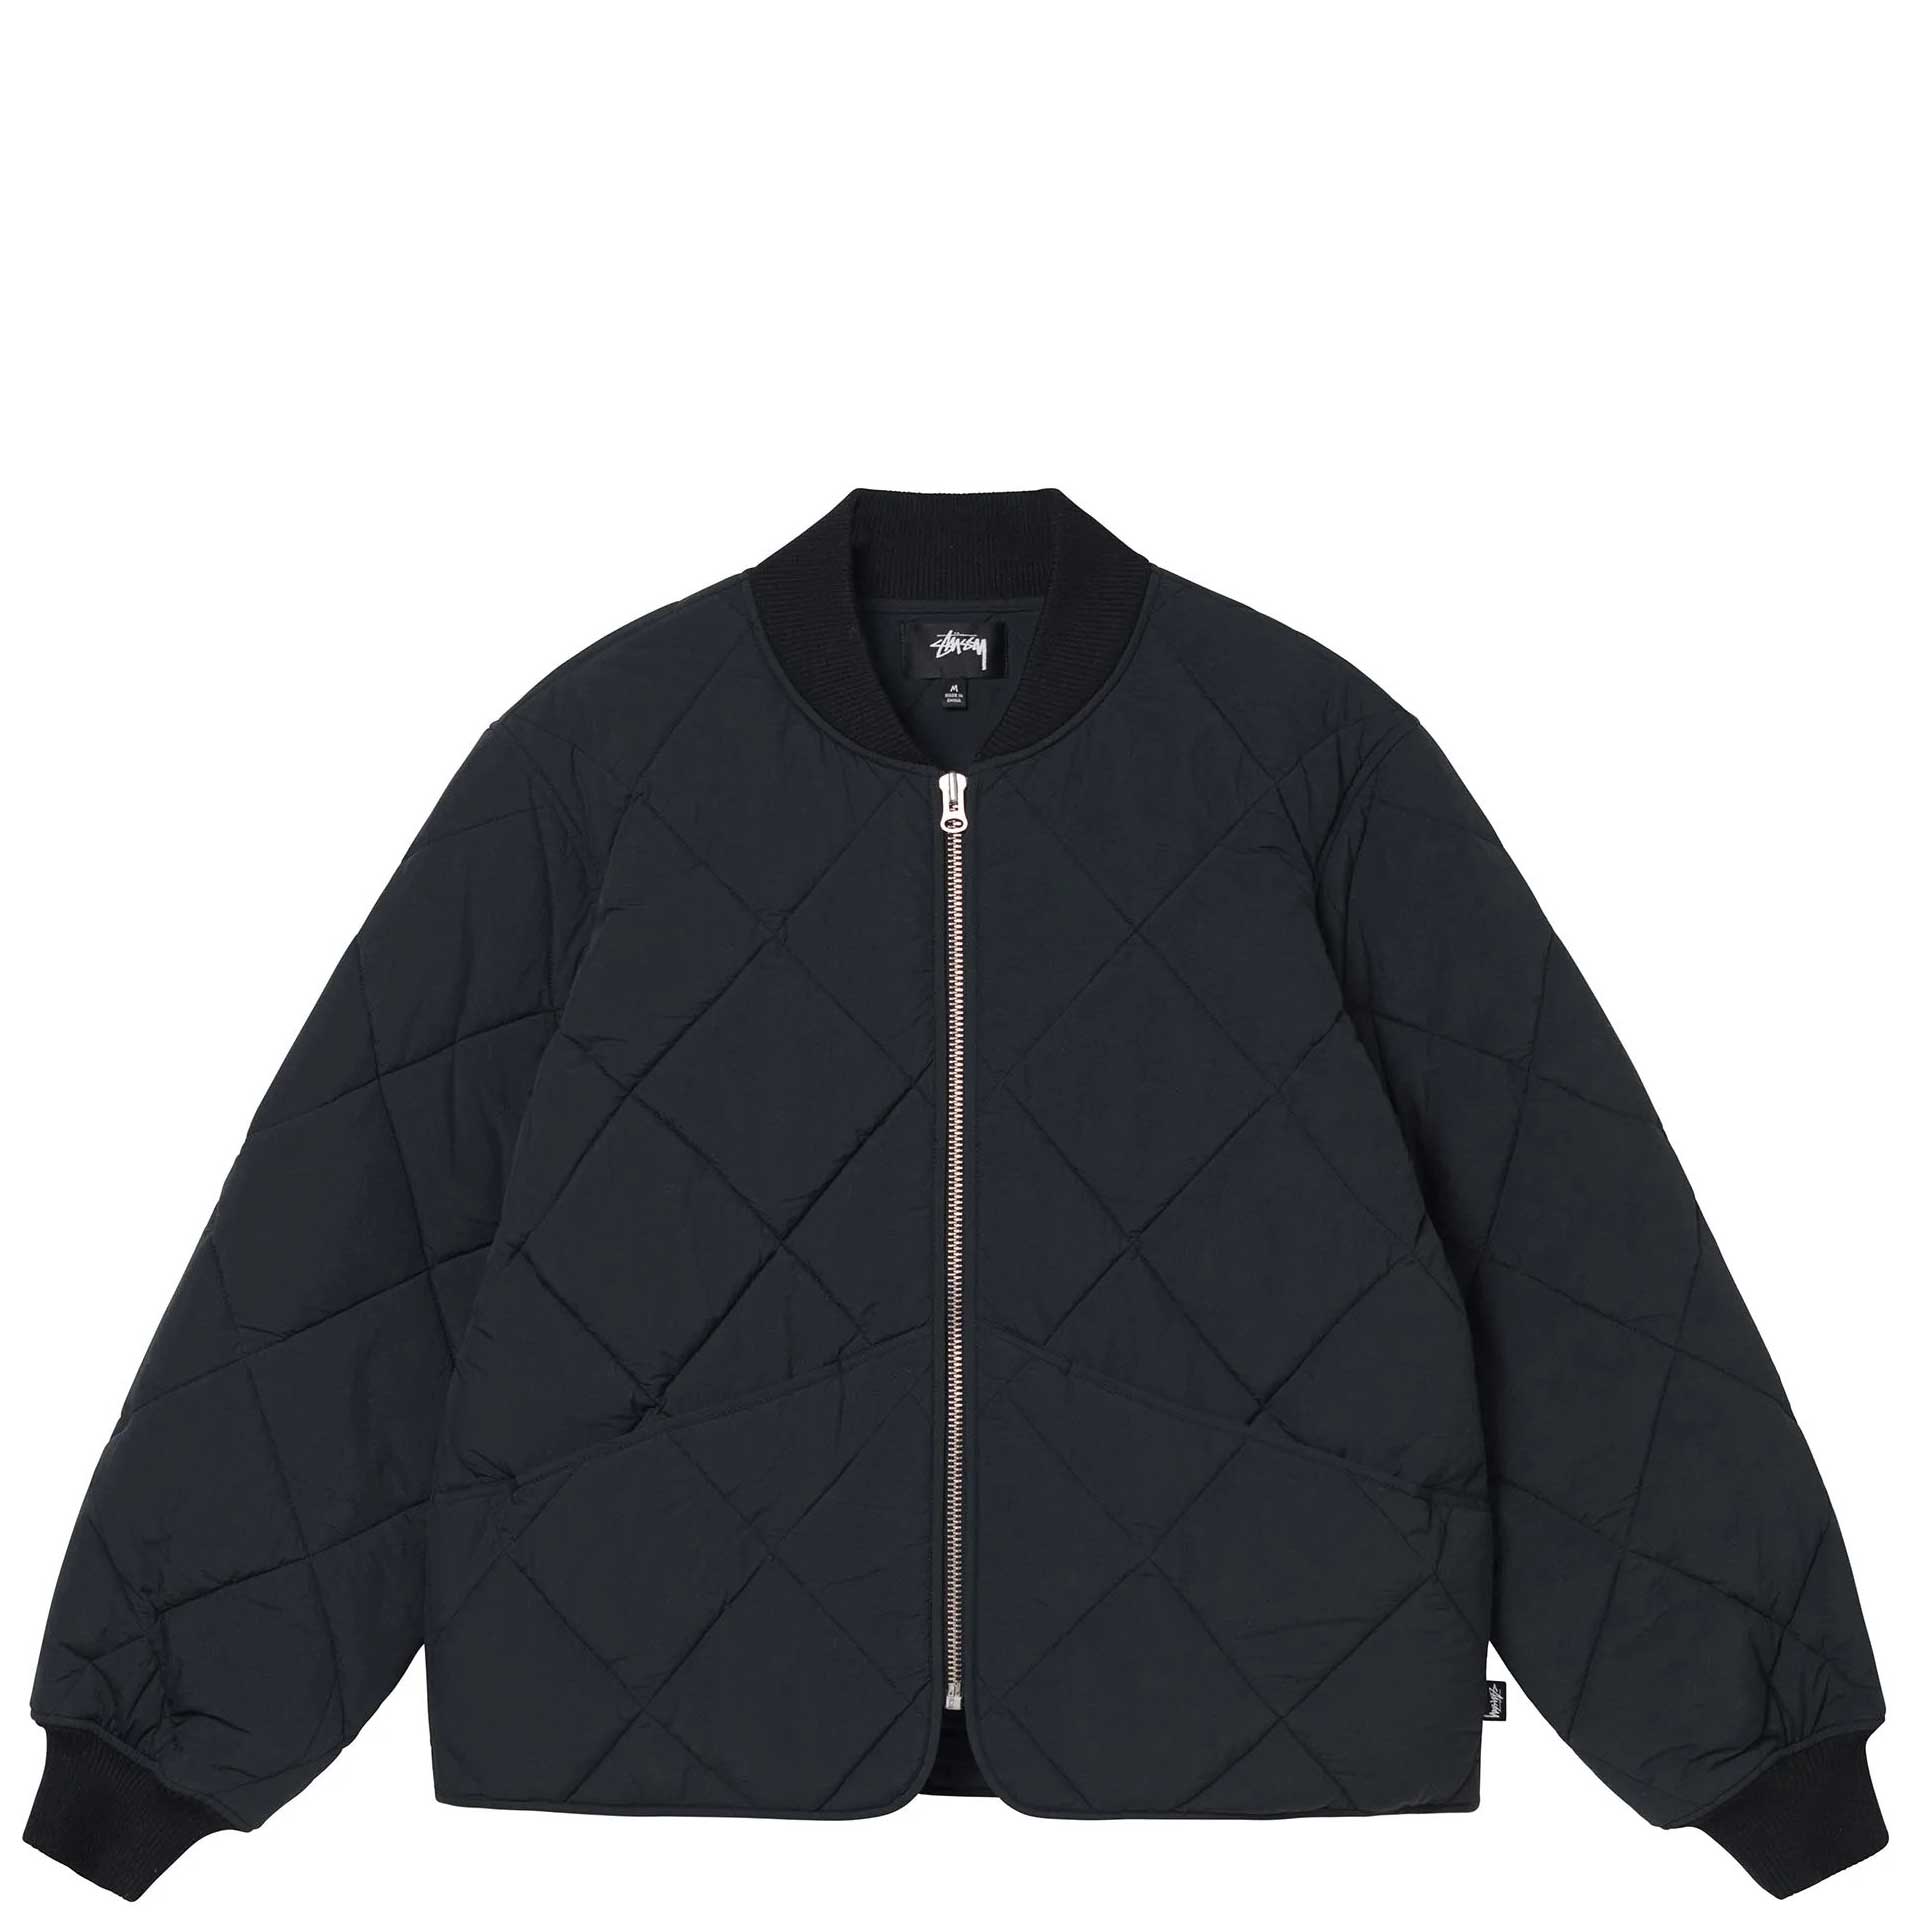 Stussy Dice Quilted Liner Jacket